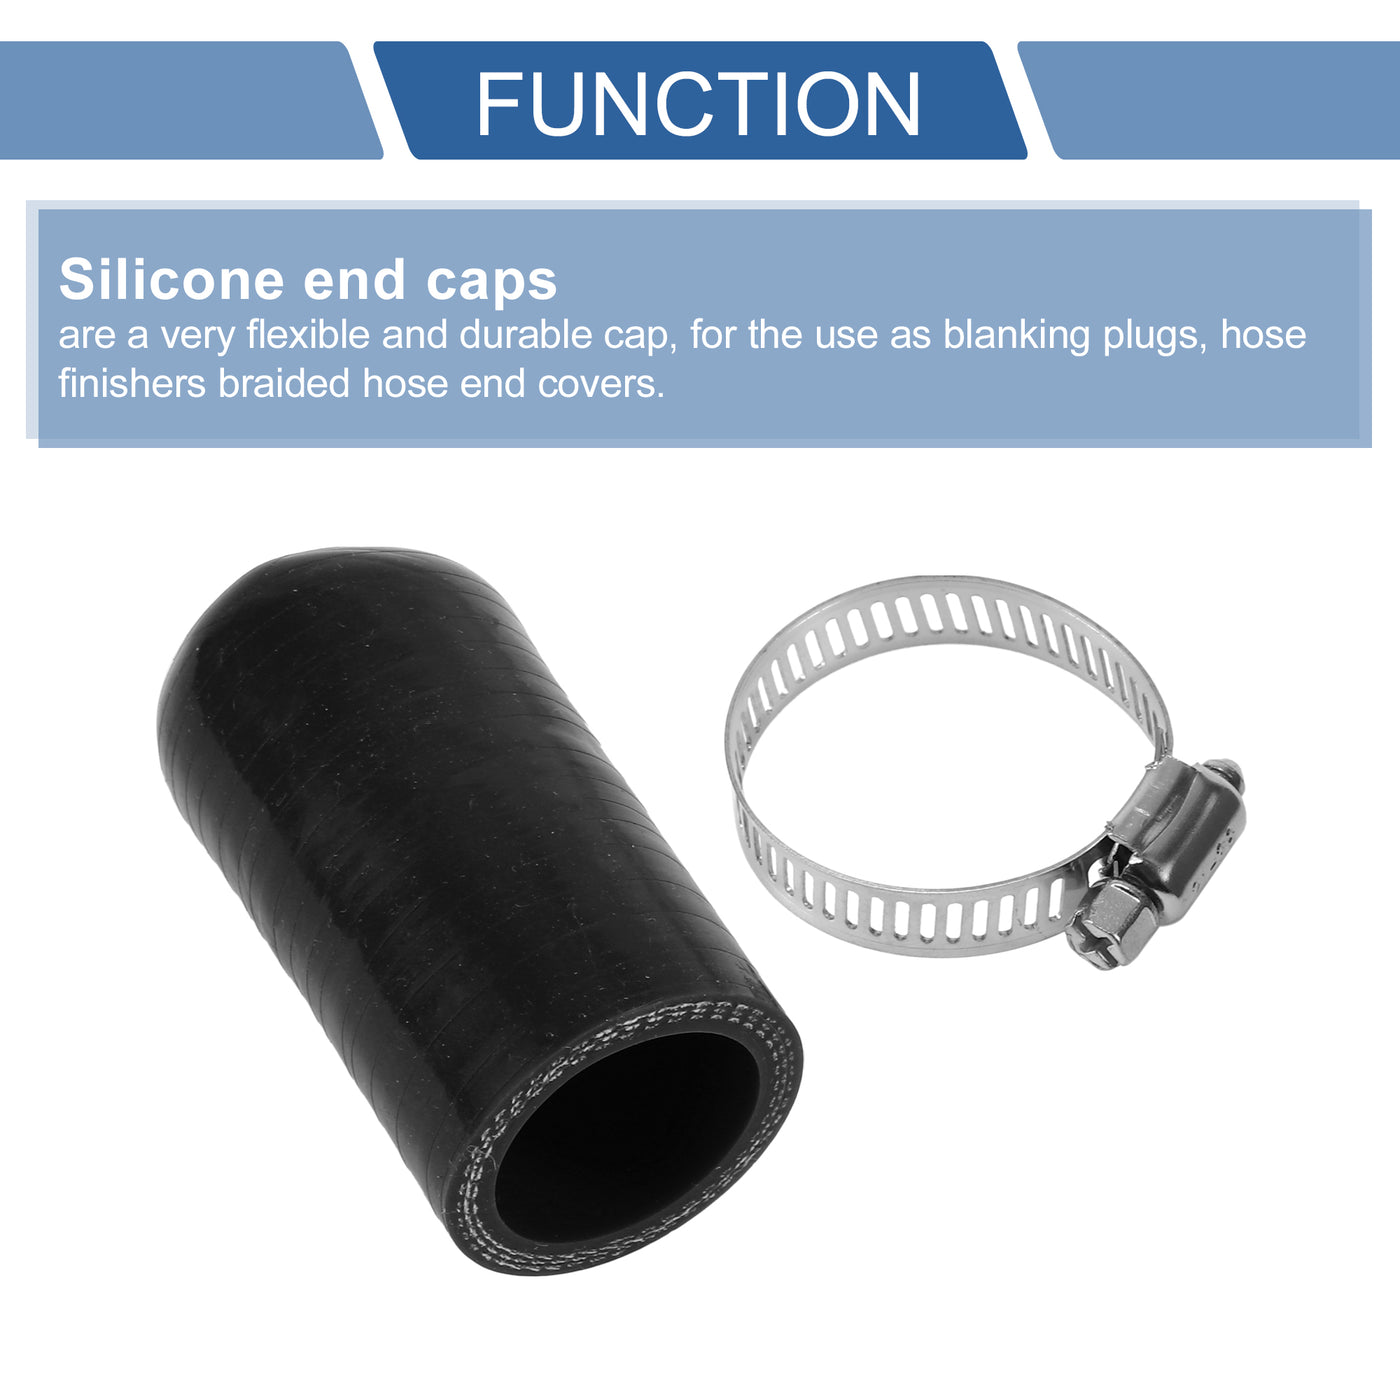 X AUTOHAUX 1 Pcs 60mm Length 28mm/1.10" ID Black Car Silicone Rubber Hose End Cap with Clamp Silicone Reinforced Blanking Cap for Bypass Tube Universal